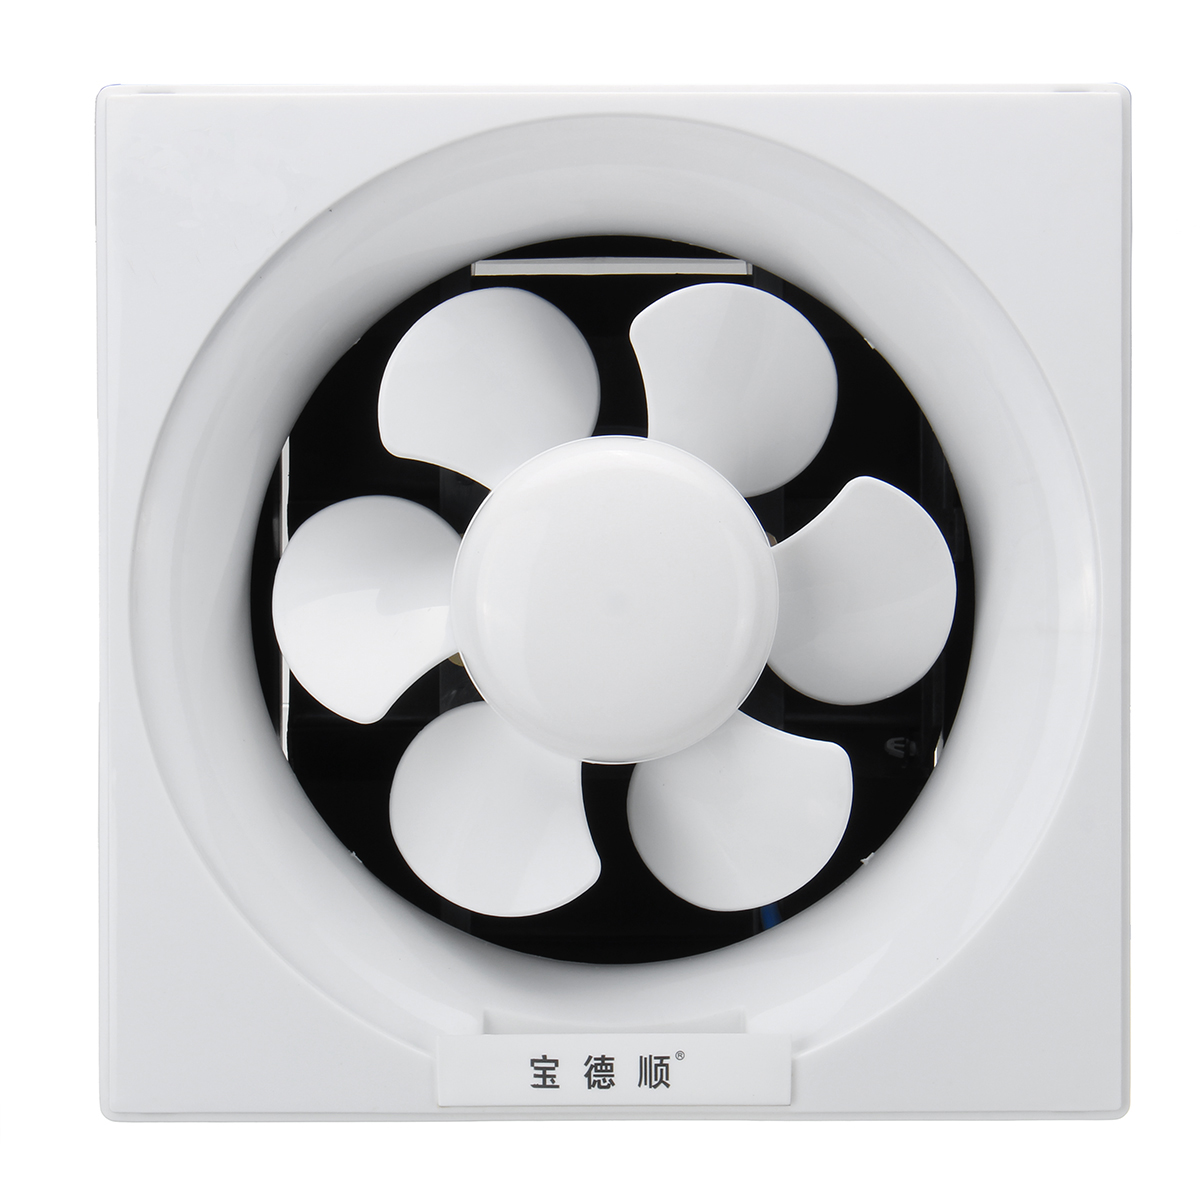 Powerful-Low-Noise-Ventilation-Extractor-Exhaust-Fan-Shutter-for-Bathroo-1348667-4